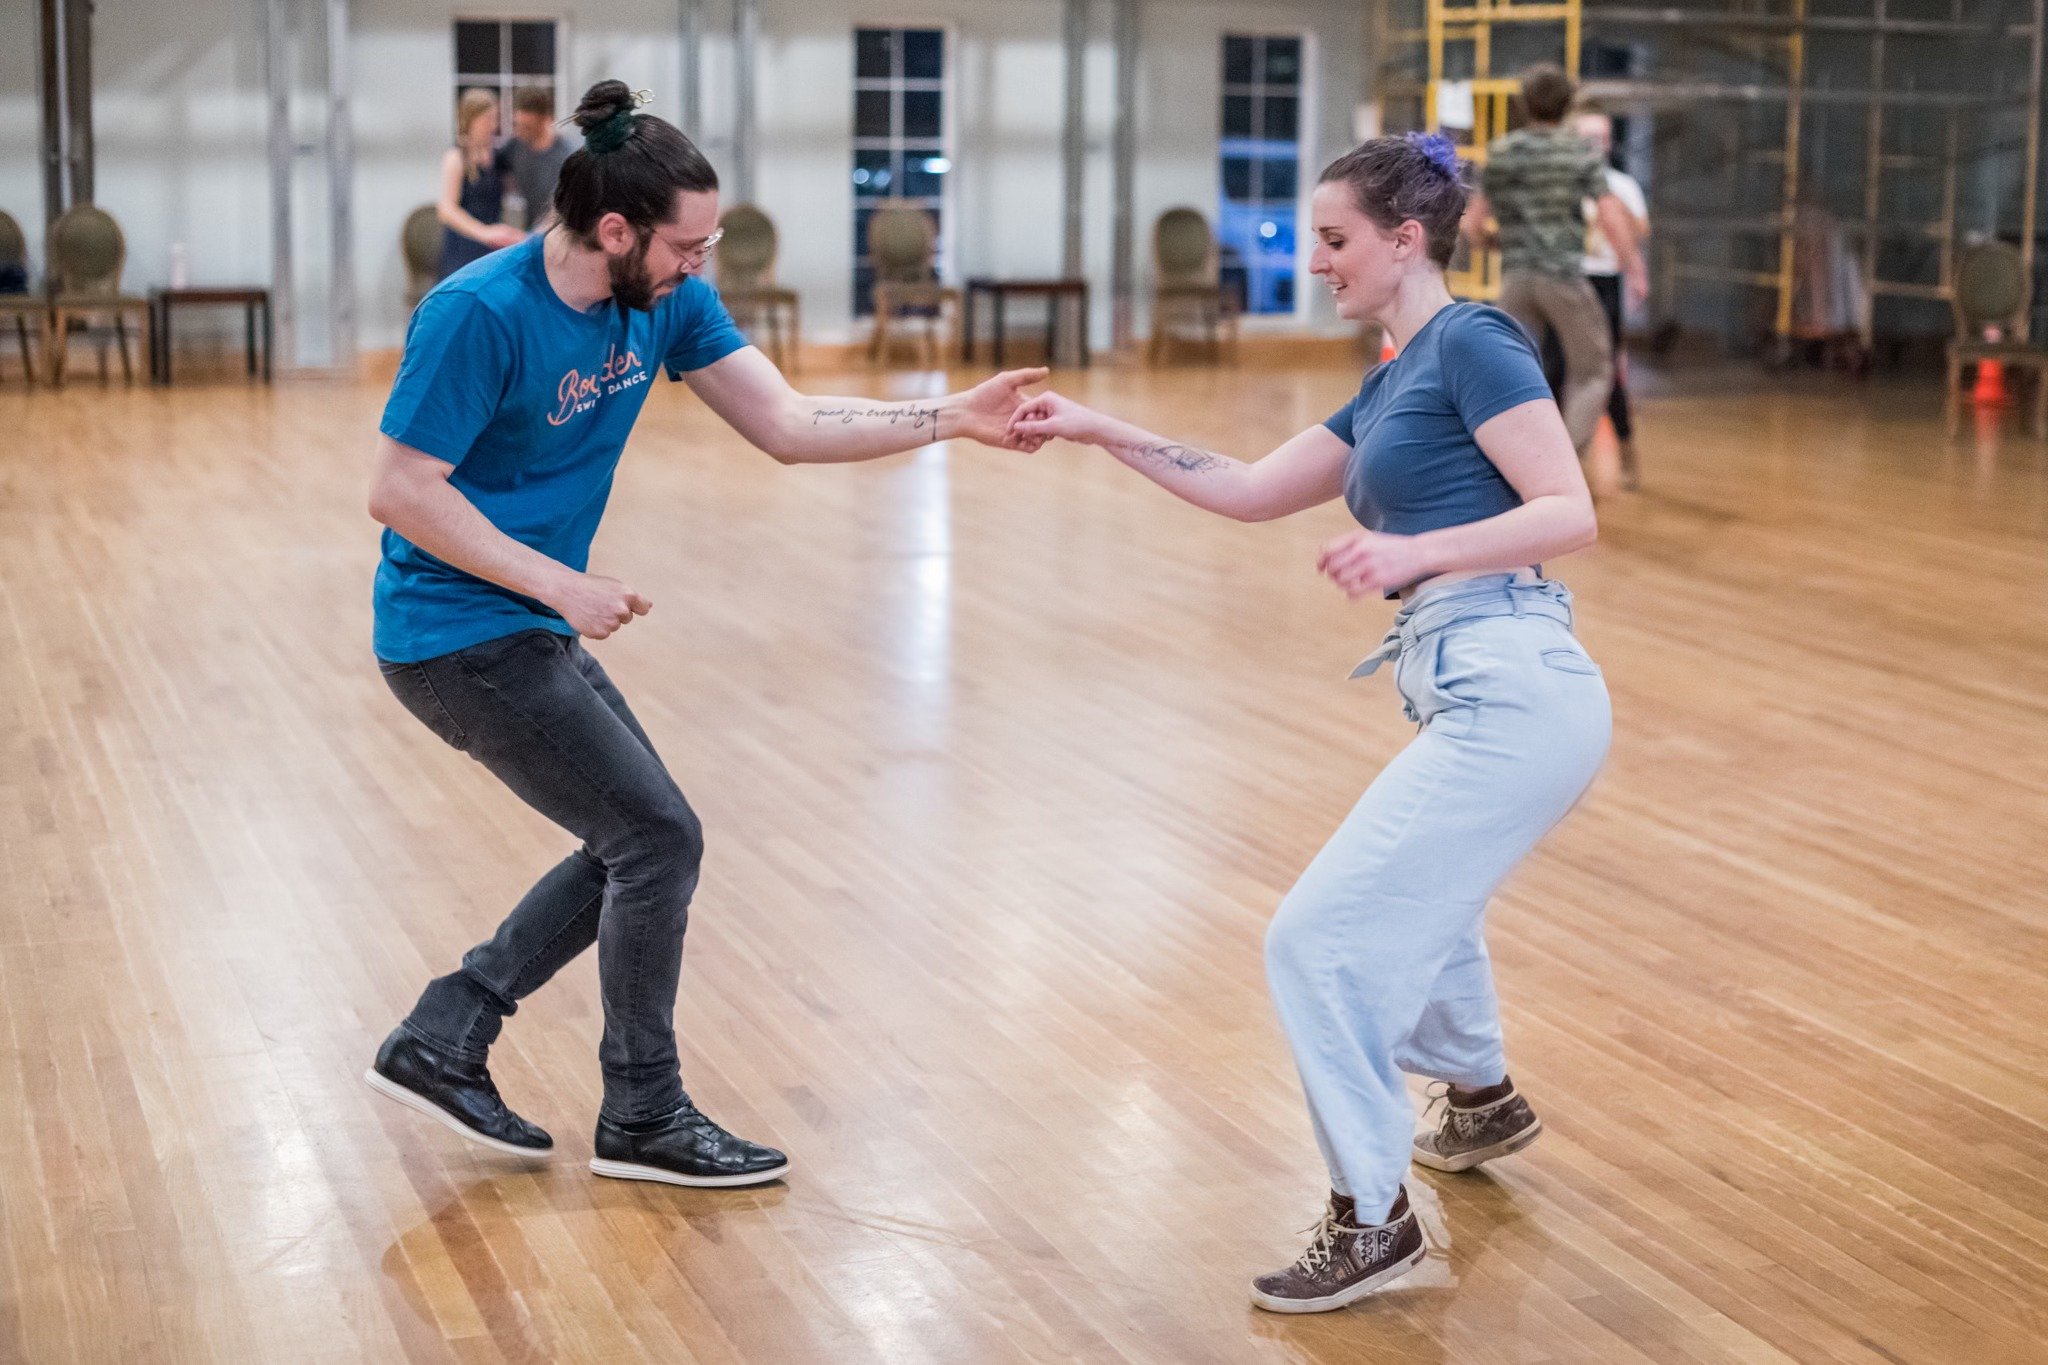 Class is back in session tomorrow! Join us for the first week of our four-week progressive series. Find your flair in our 6:45 p.m. class, which focuses on rhythms and movements for playful interactions with the music and your partner. At 8 p.m., our